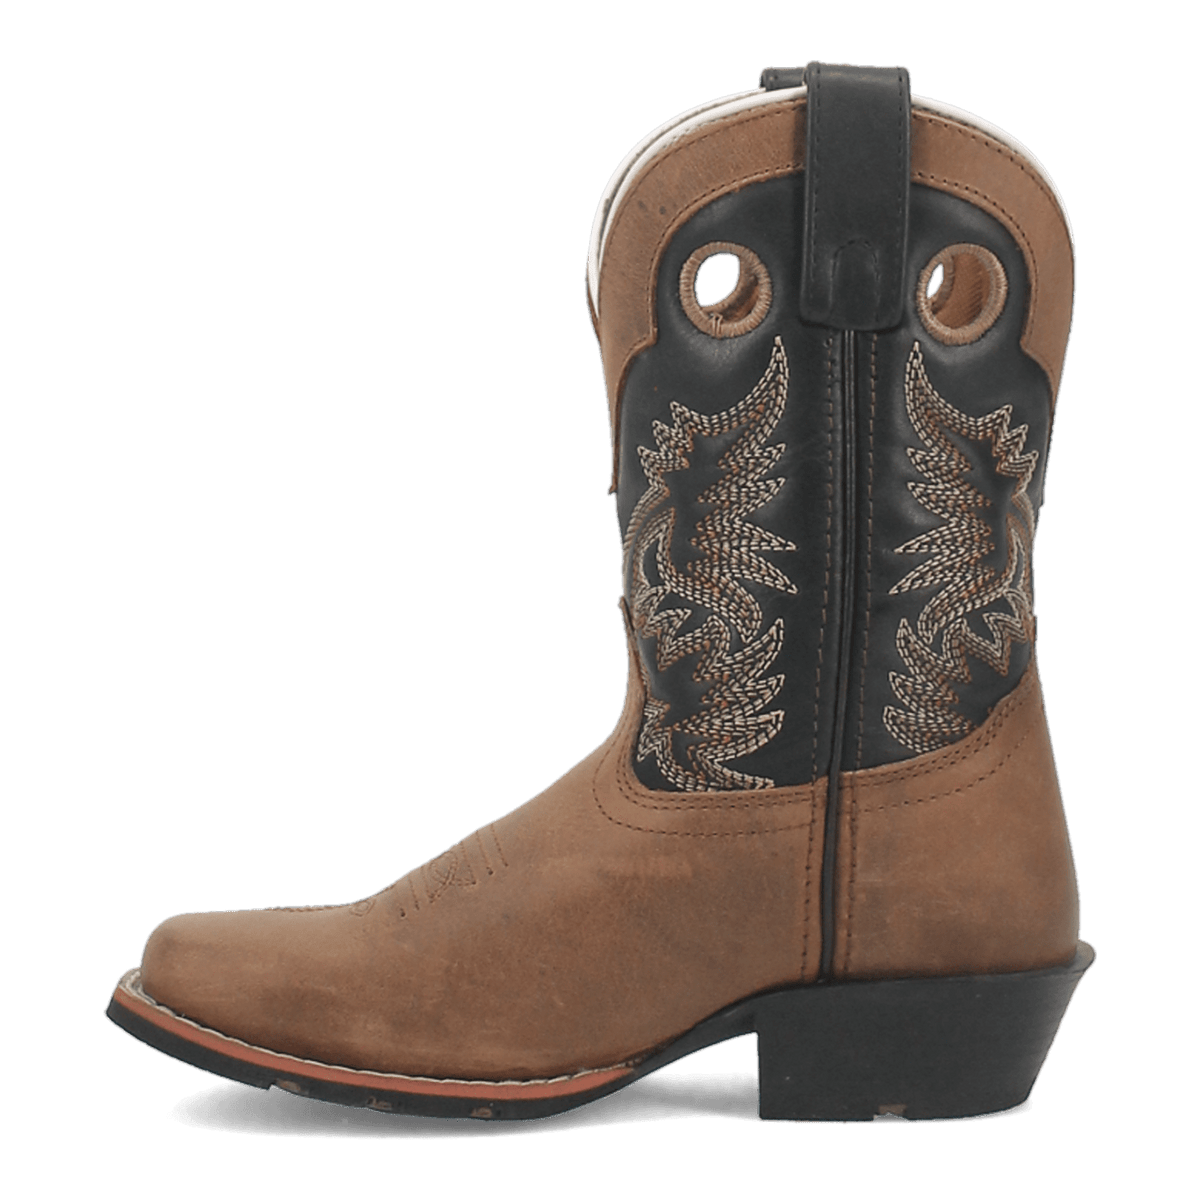 RASCAL LEATHER CHILDREN'S BOOT Image